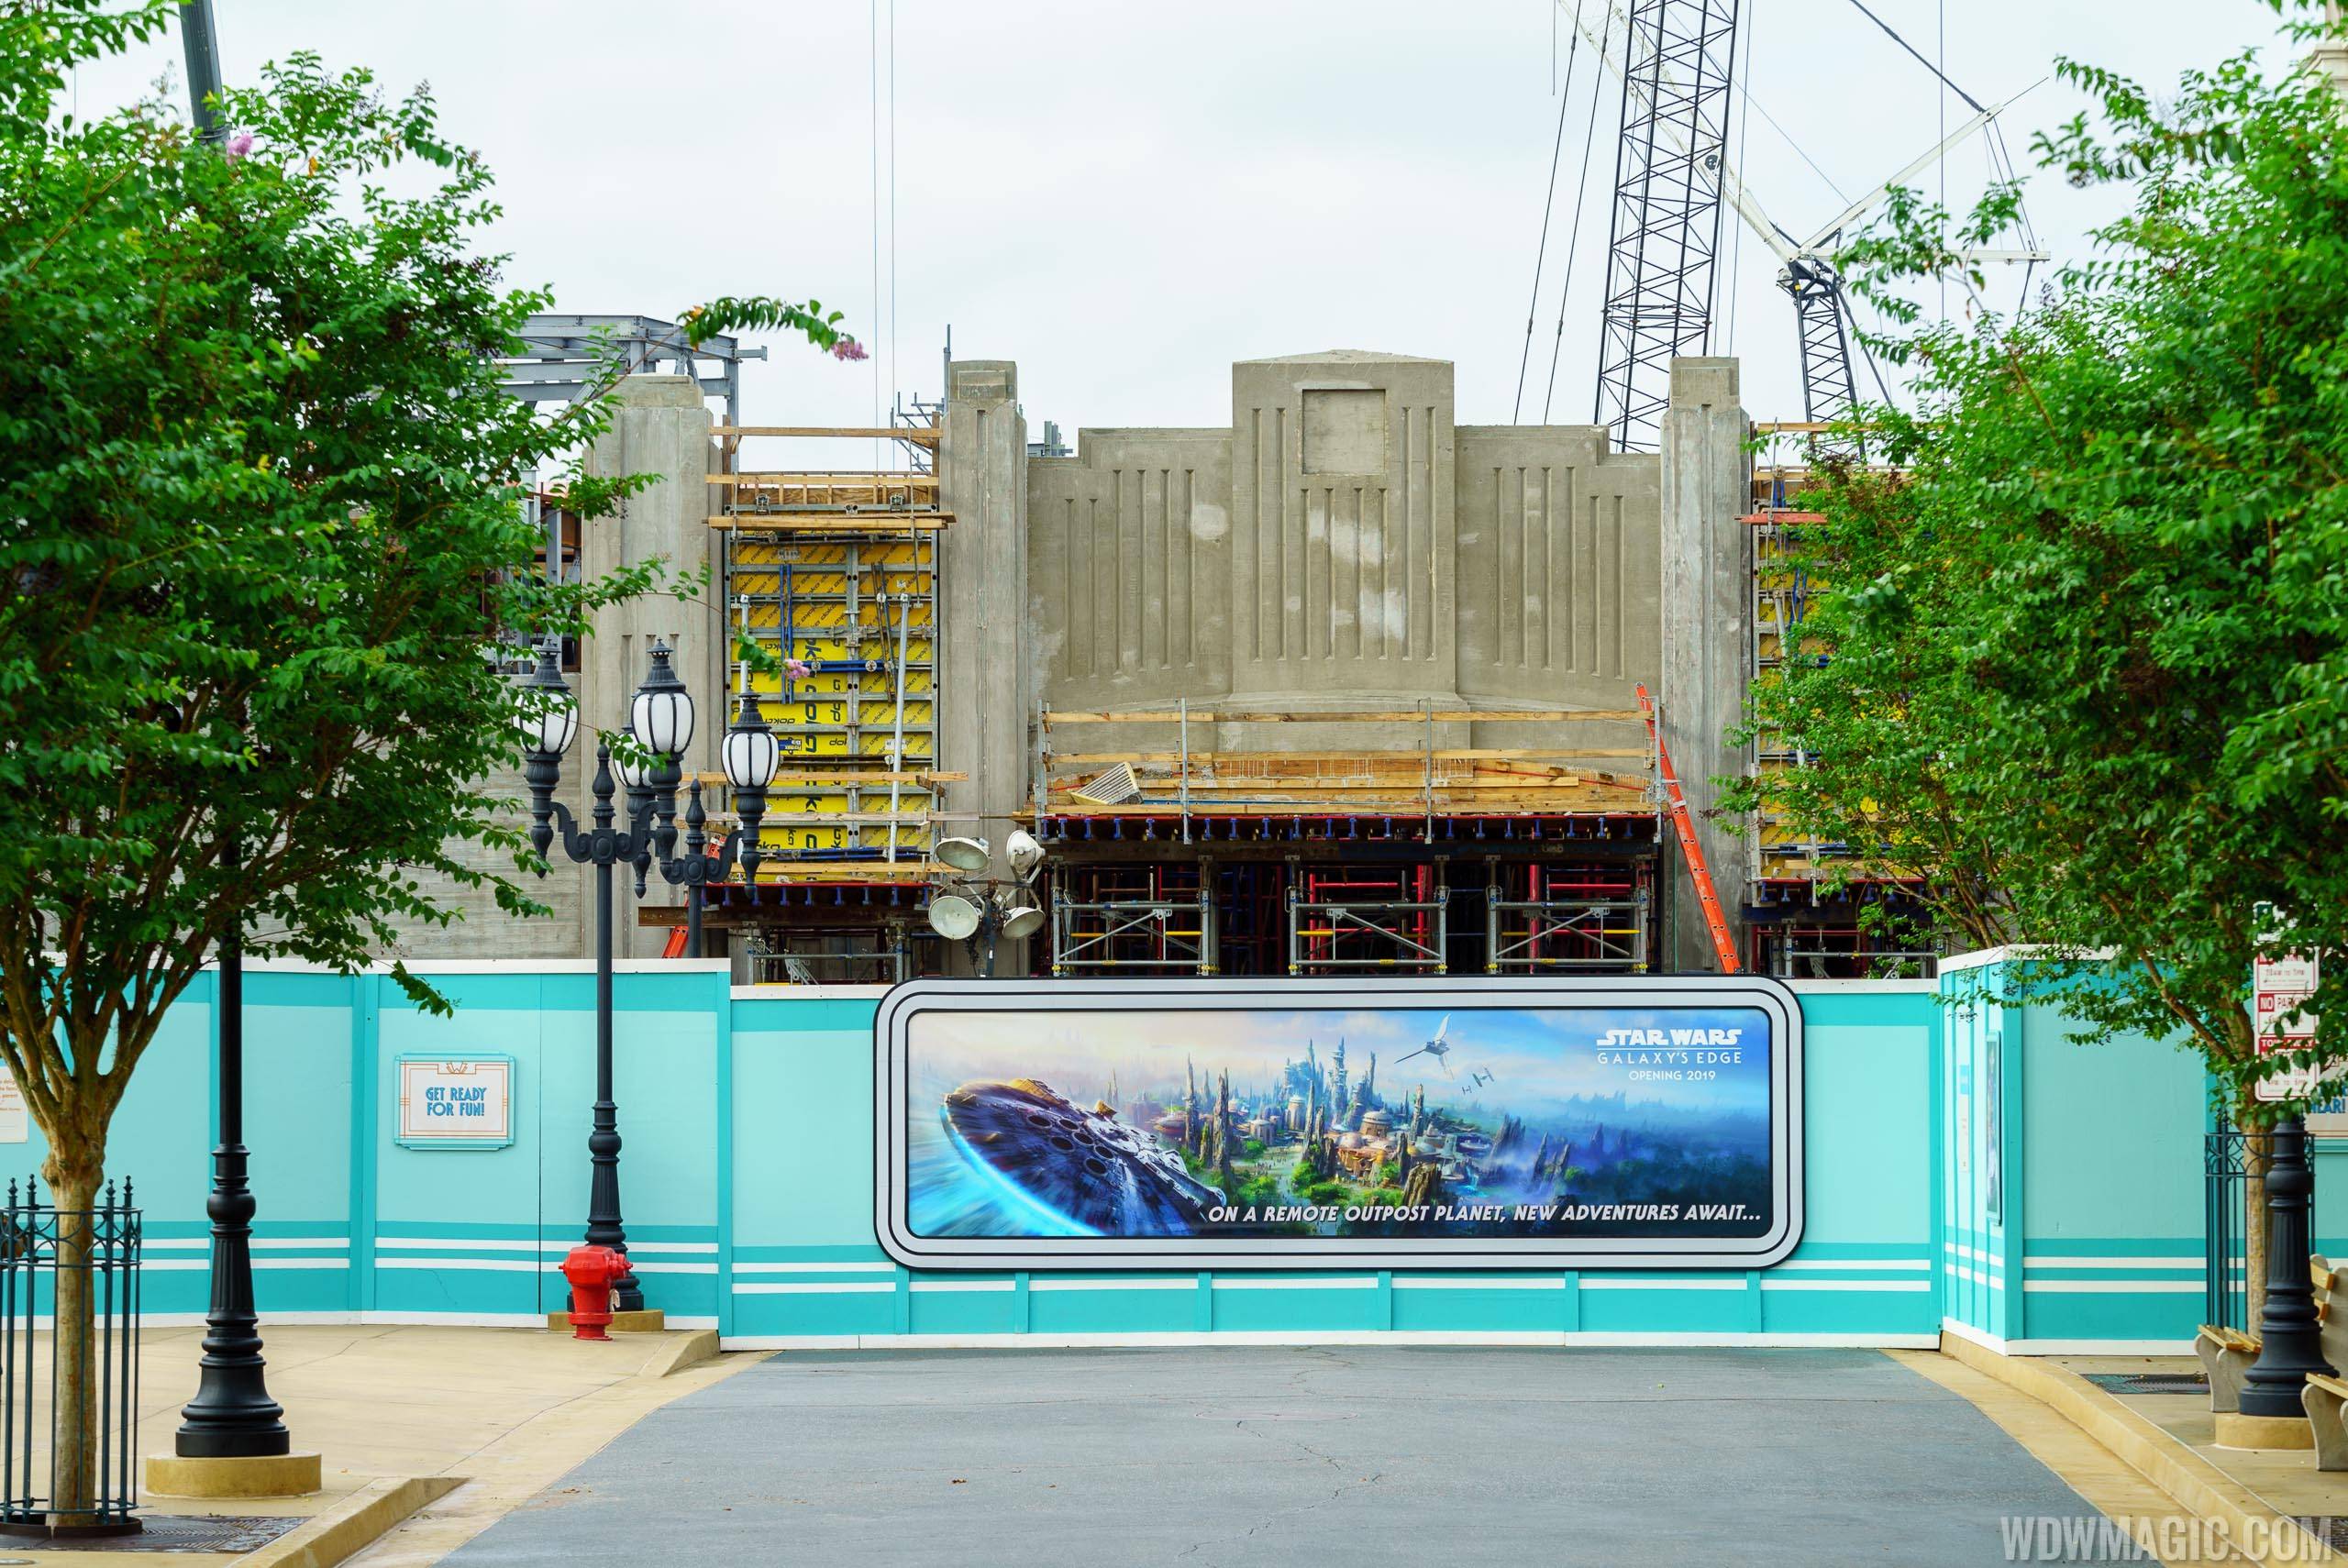 PHOTOS - More walls around the entrance area to Star Wars Galaxy's Edge